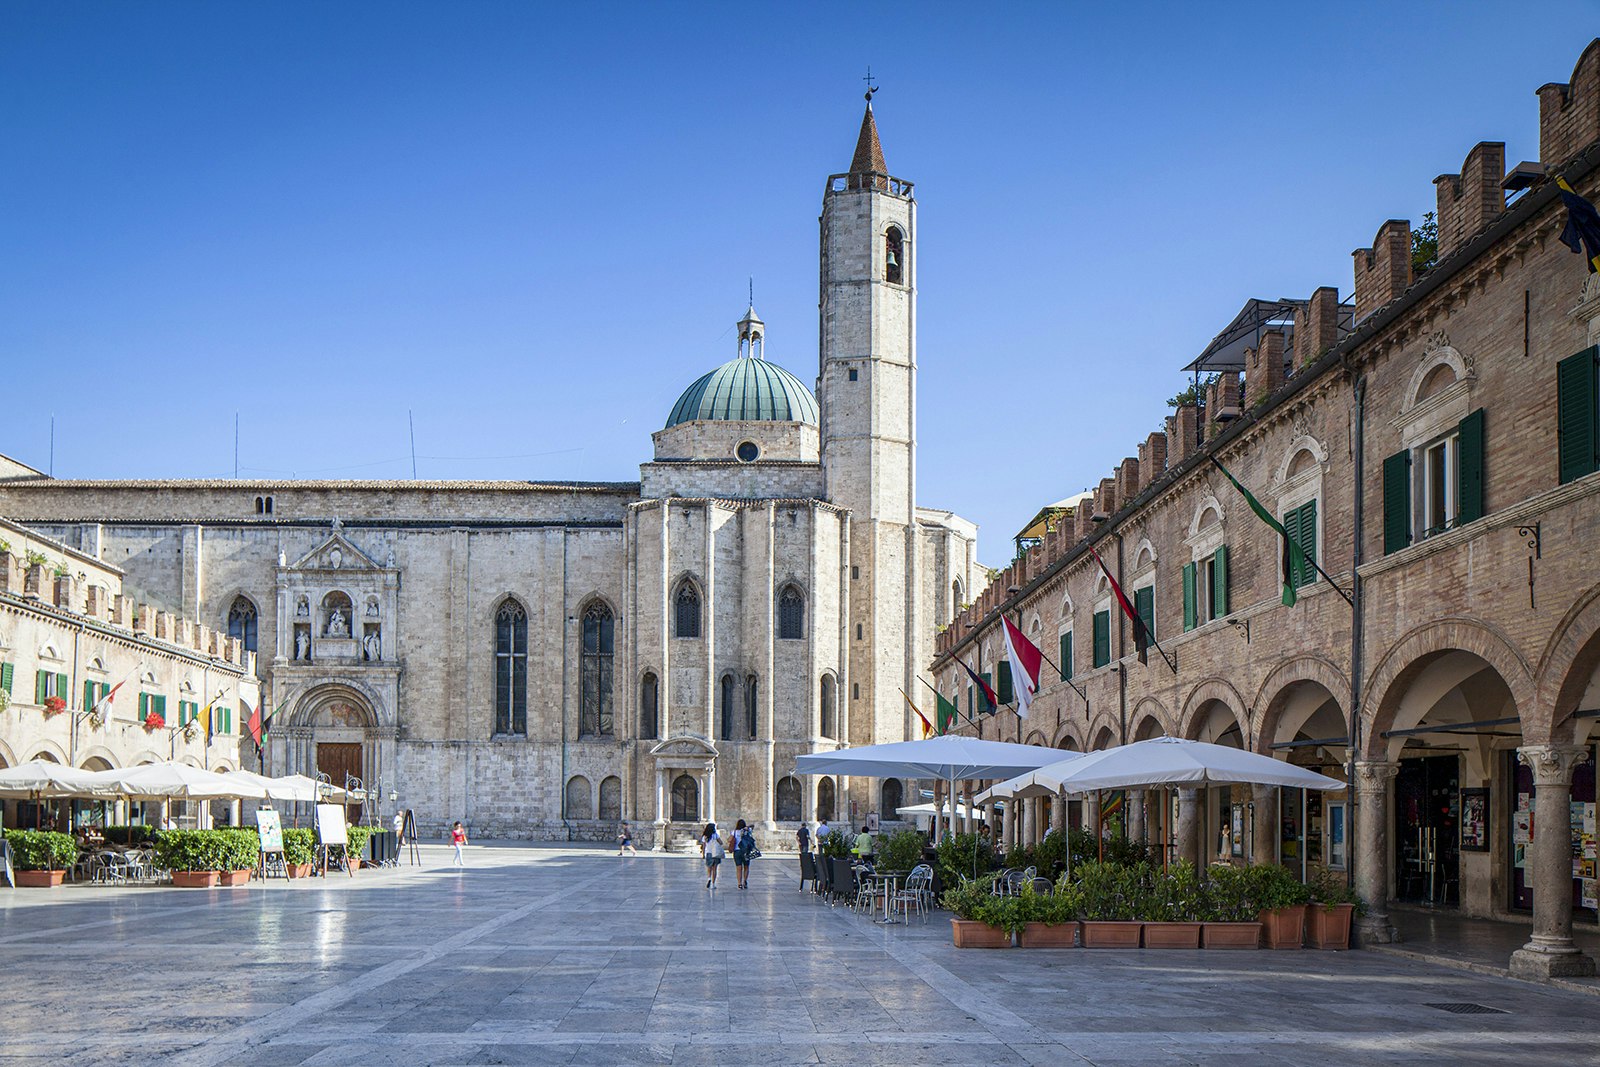 People walk through a stone-tiled piazza backed by a cathedral in Ascoli Piceno. The piazza is lined by historic buildings and bar terraces.